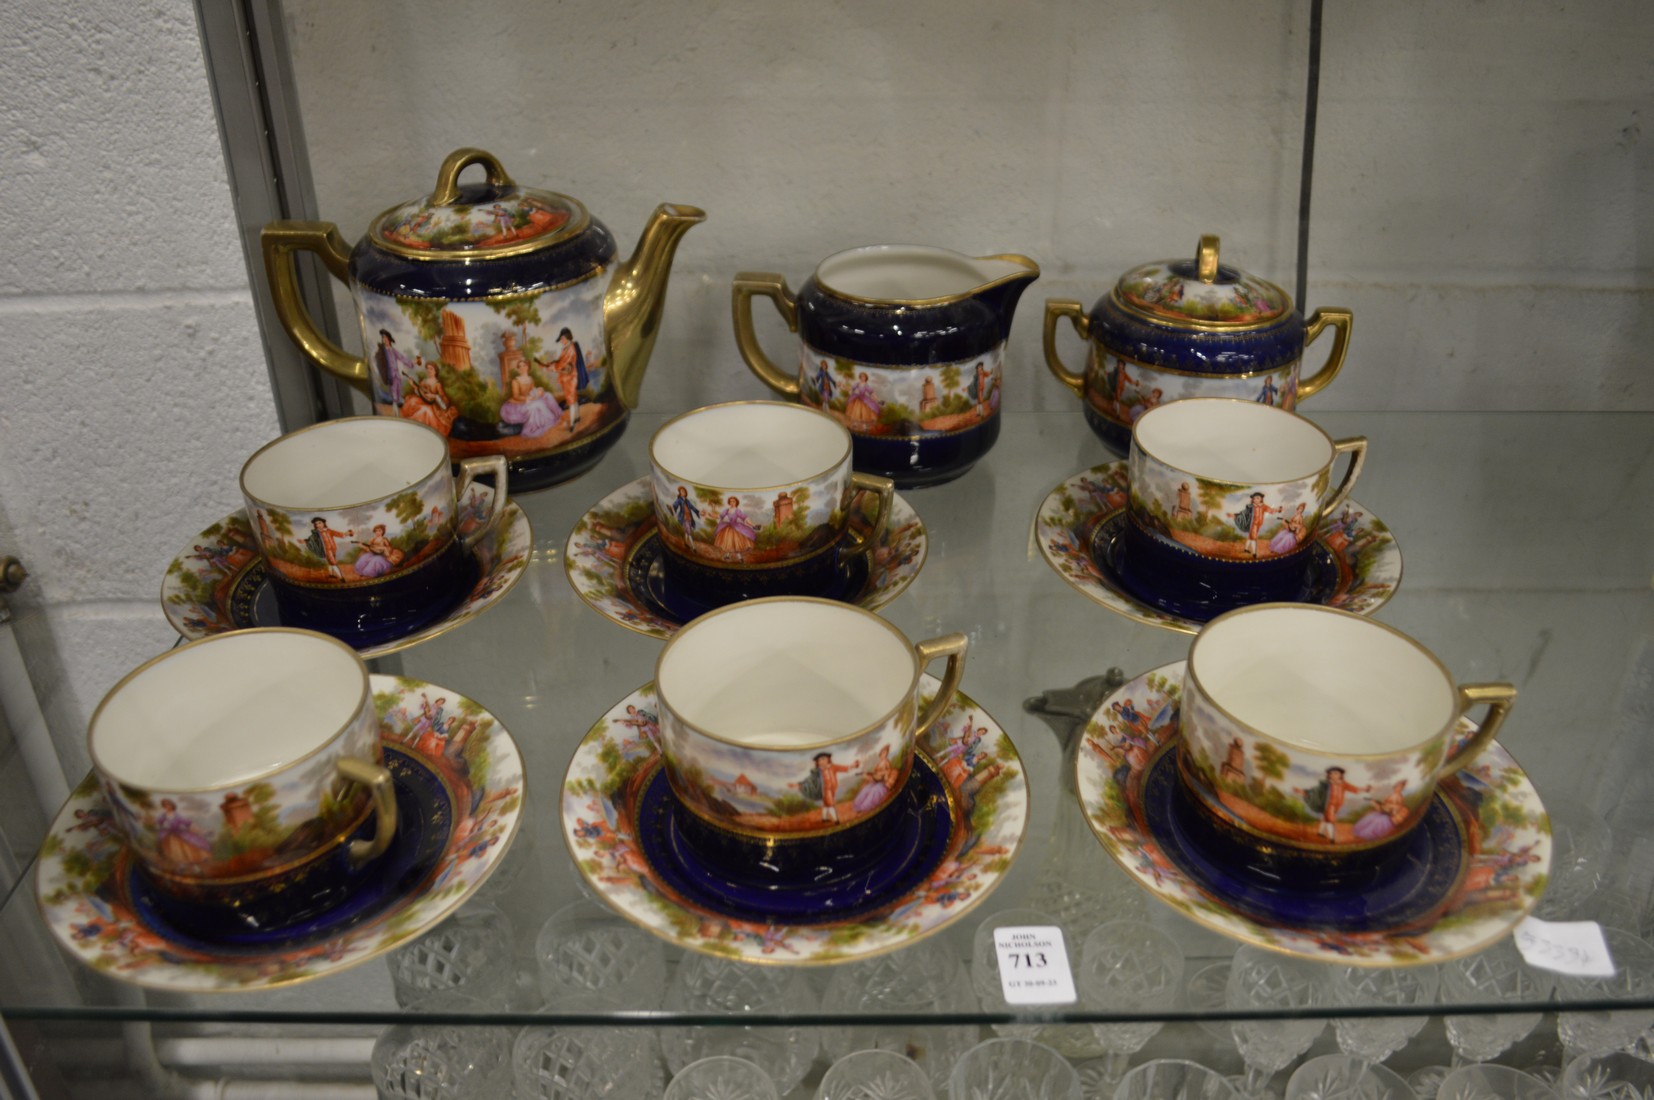 Continental porcelain tea service decorated with figures in a landscape.